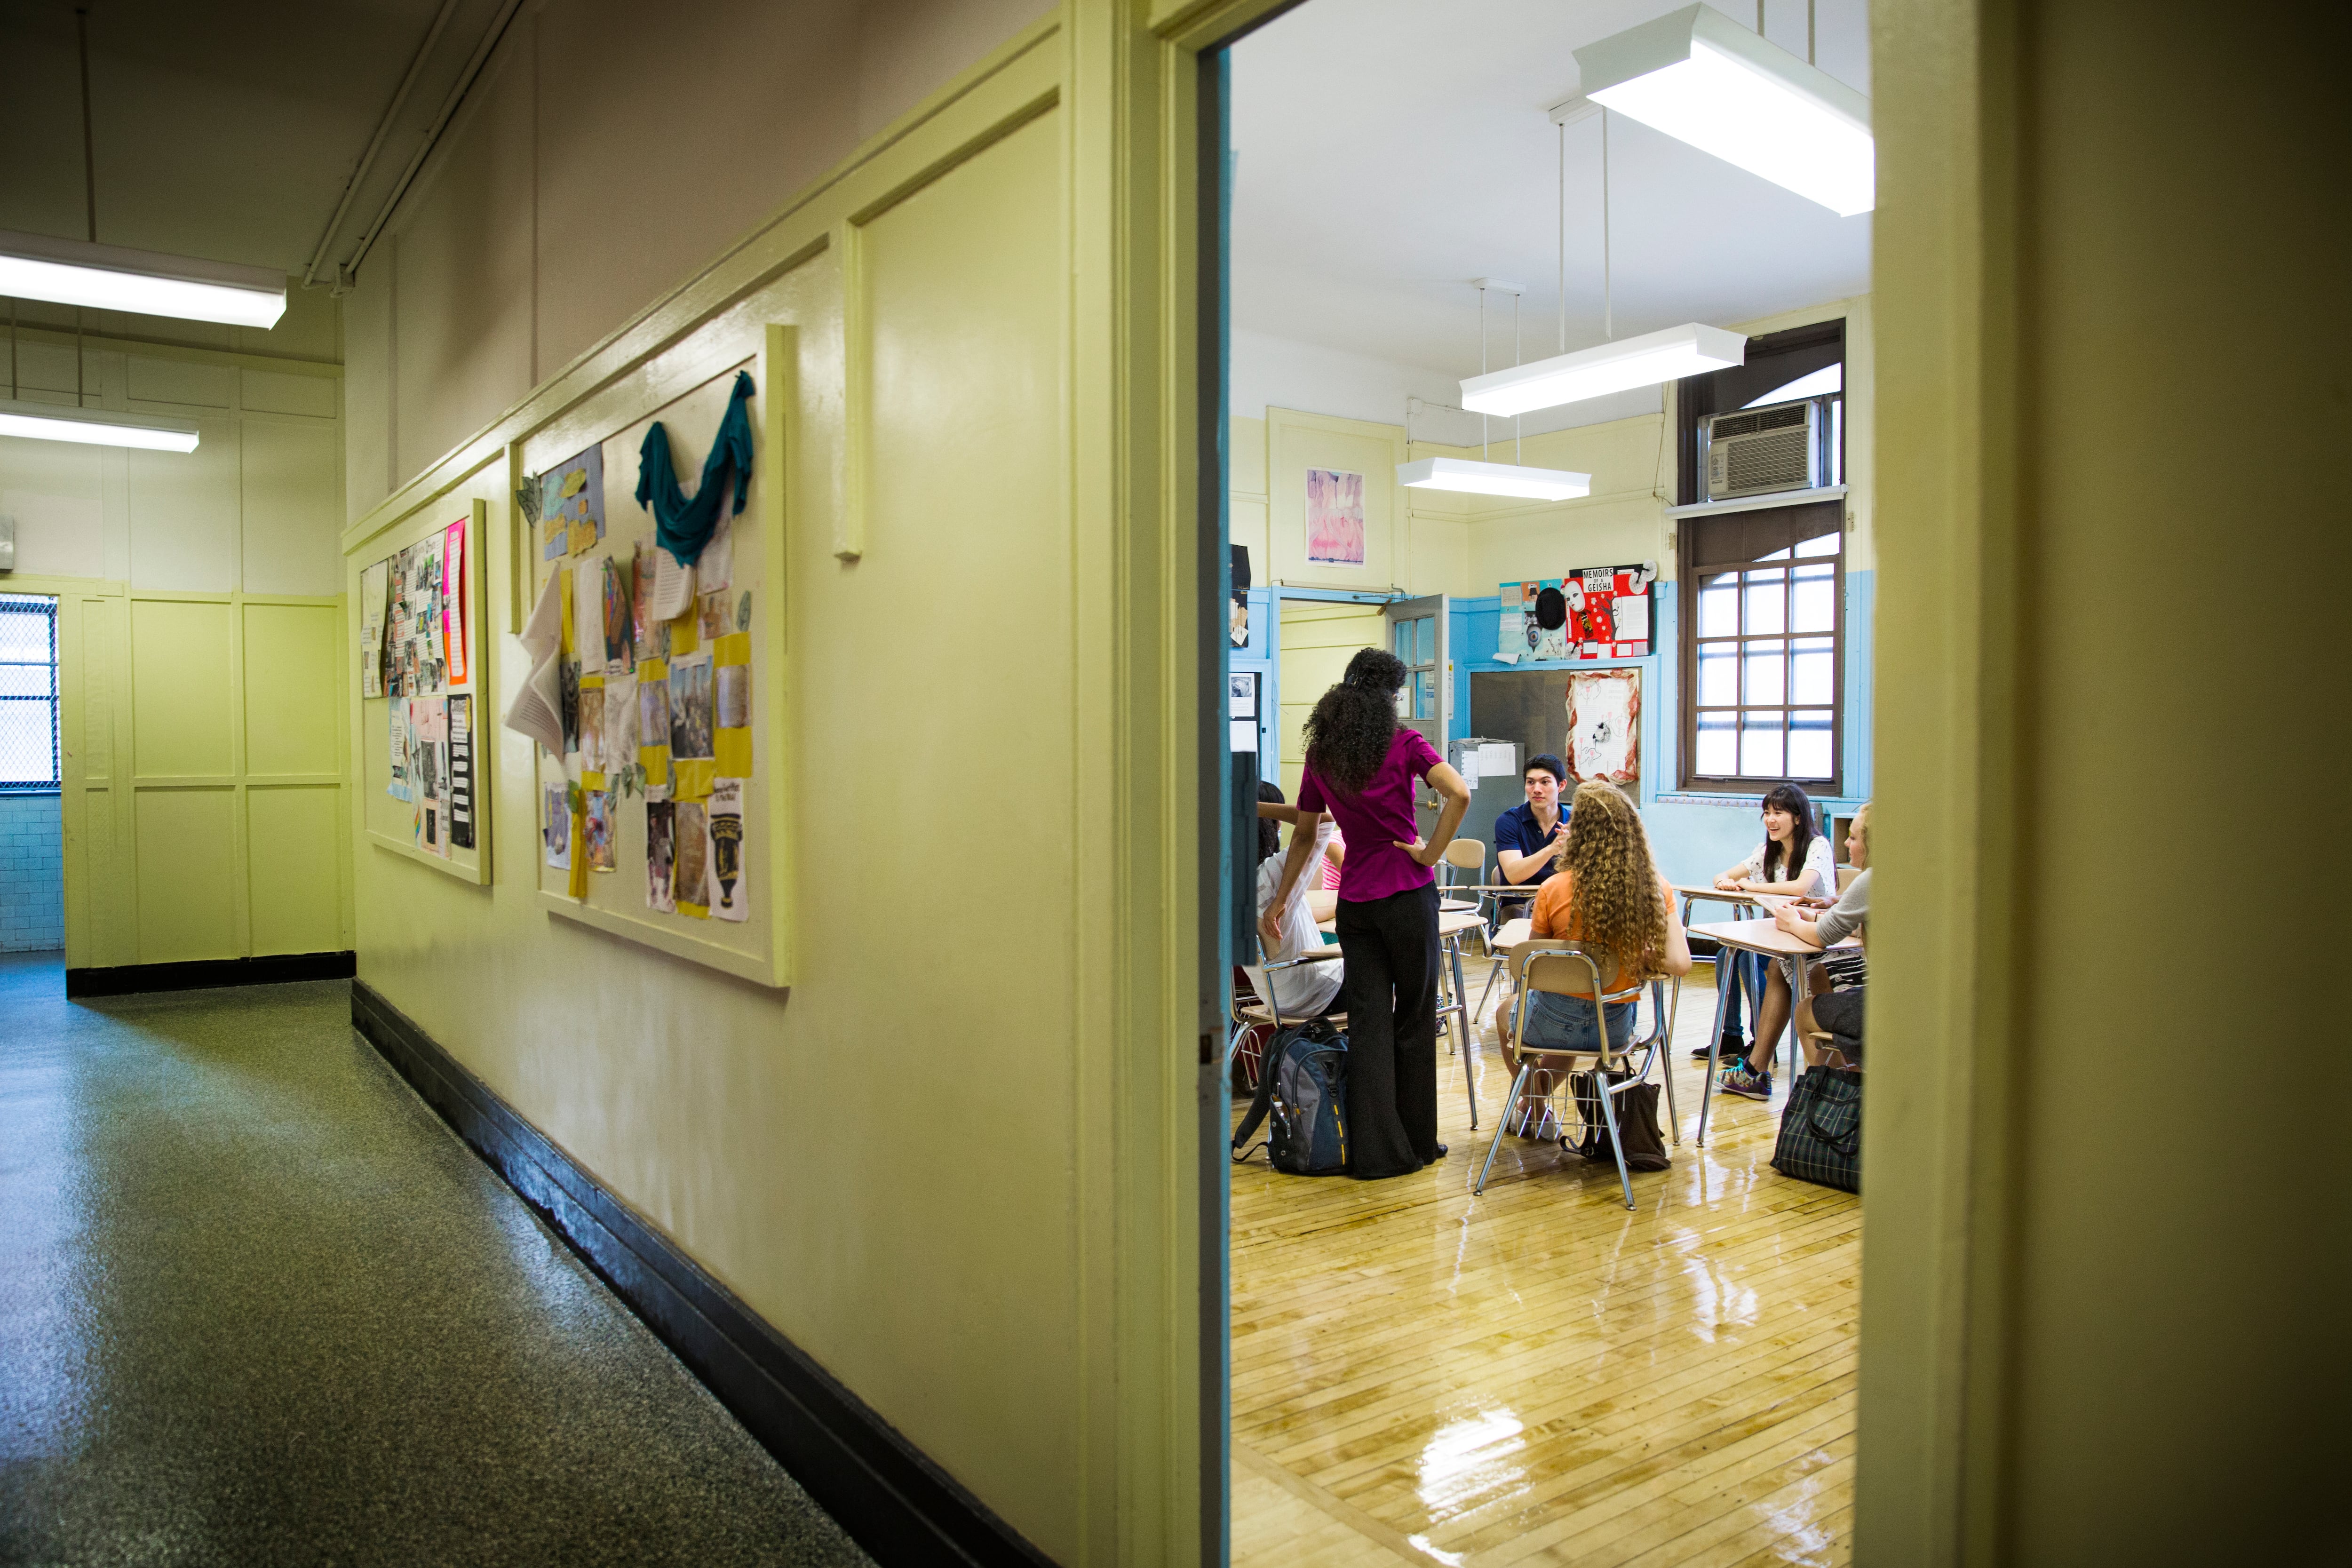 A view of students and a teacher in a classroom seen through a door and a hallway on the left.